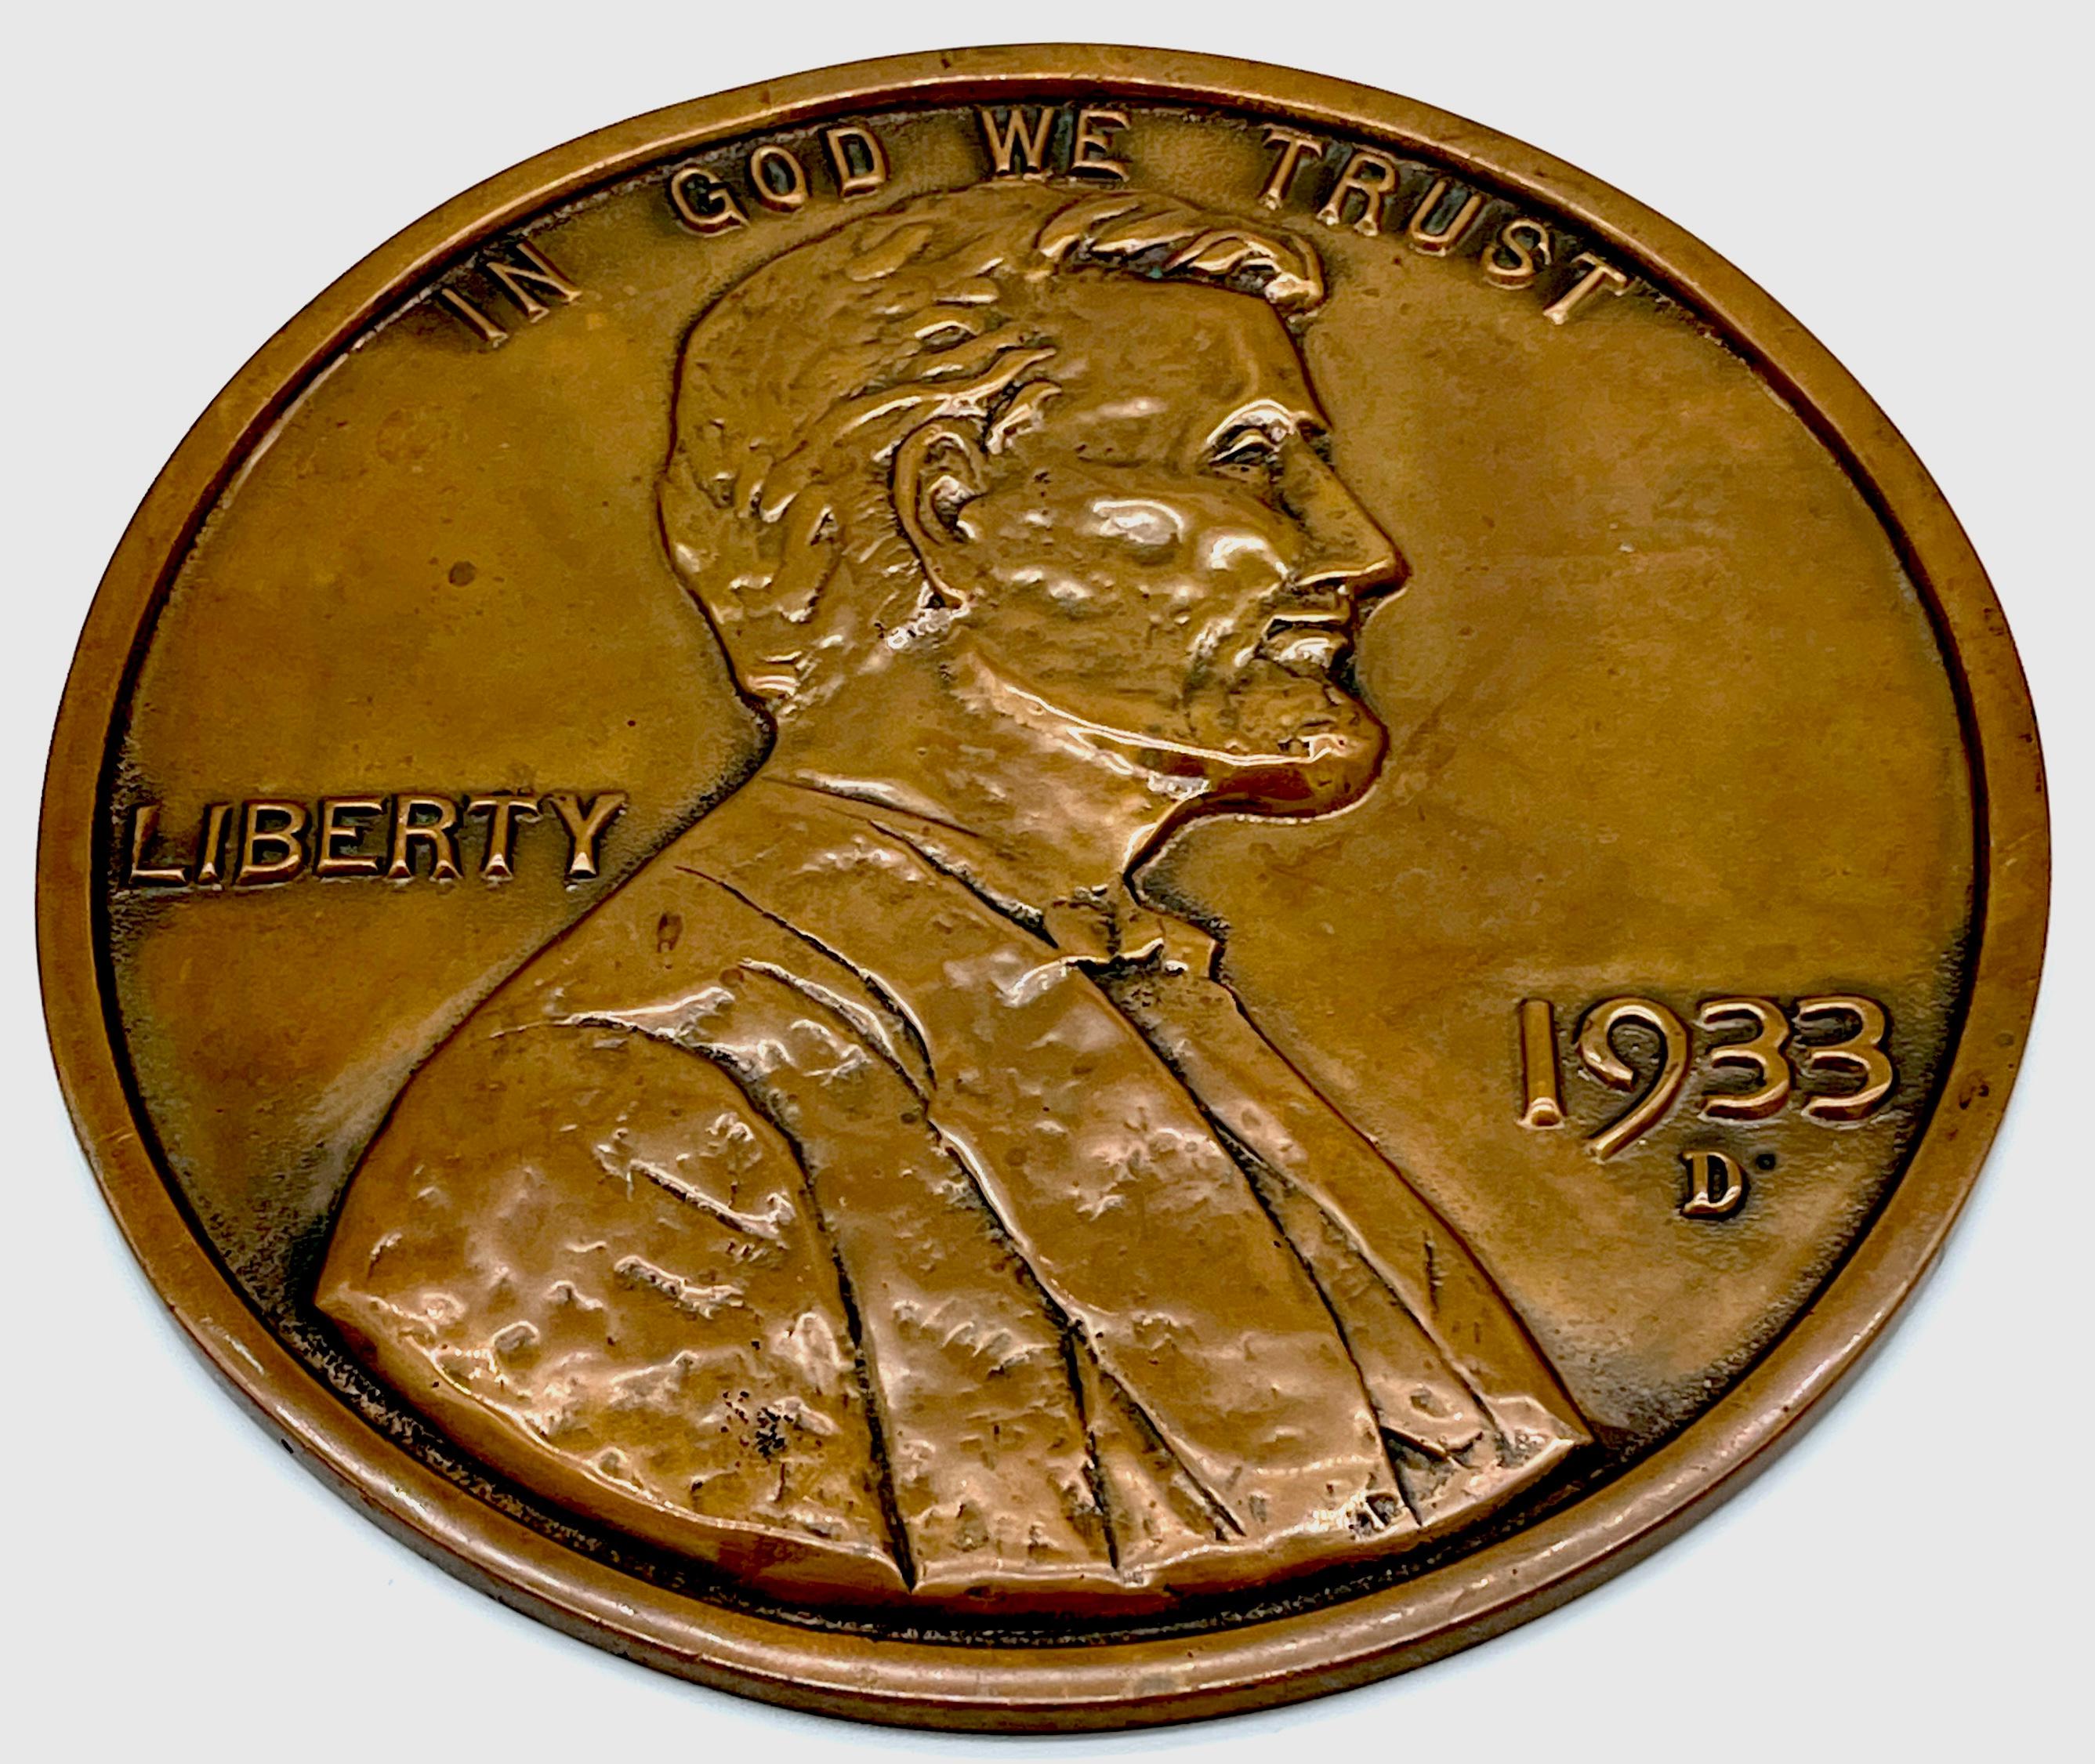 Maquette or Sculpture of Victor David Brenner's 1933 D Lincoln Penny Front/Obverse

Offered for sale is a remarkable maquette or sculpture replicating Victor David Brenner's iconic 1933 D Lincoln Penny Front/Obverse. Monumental in size, it measures